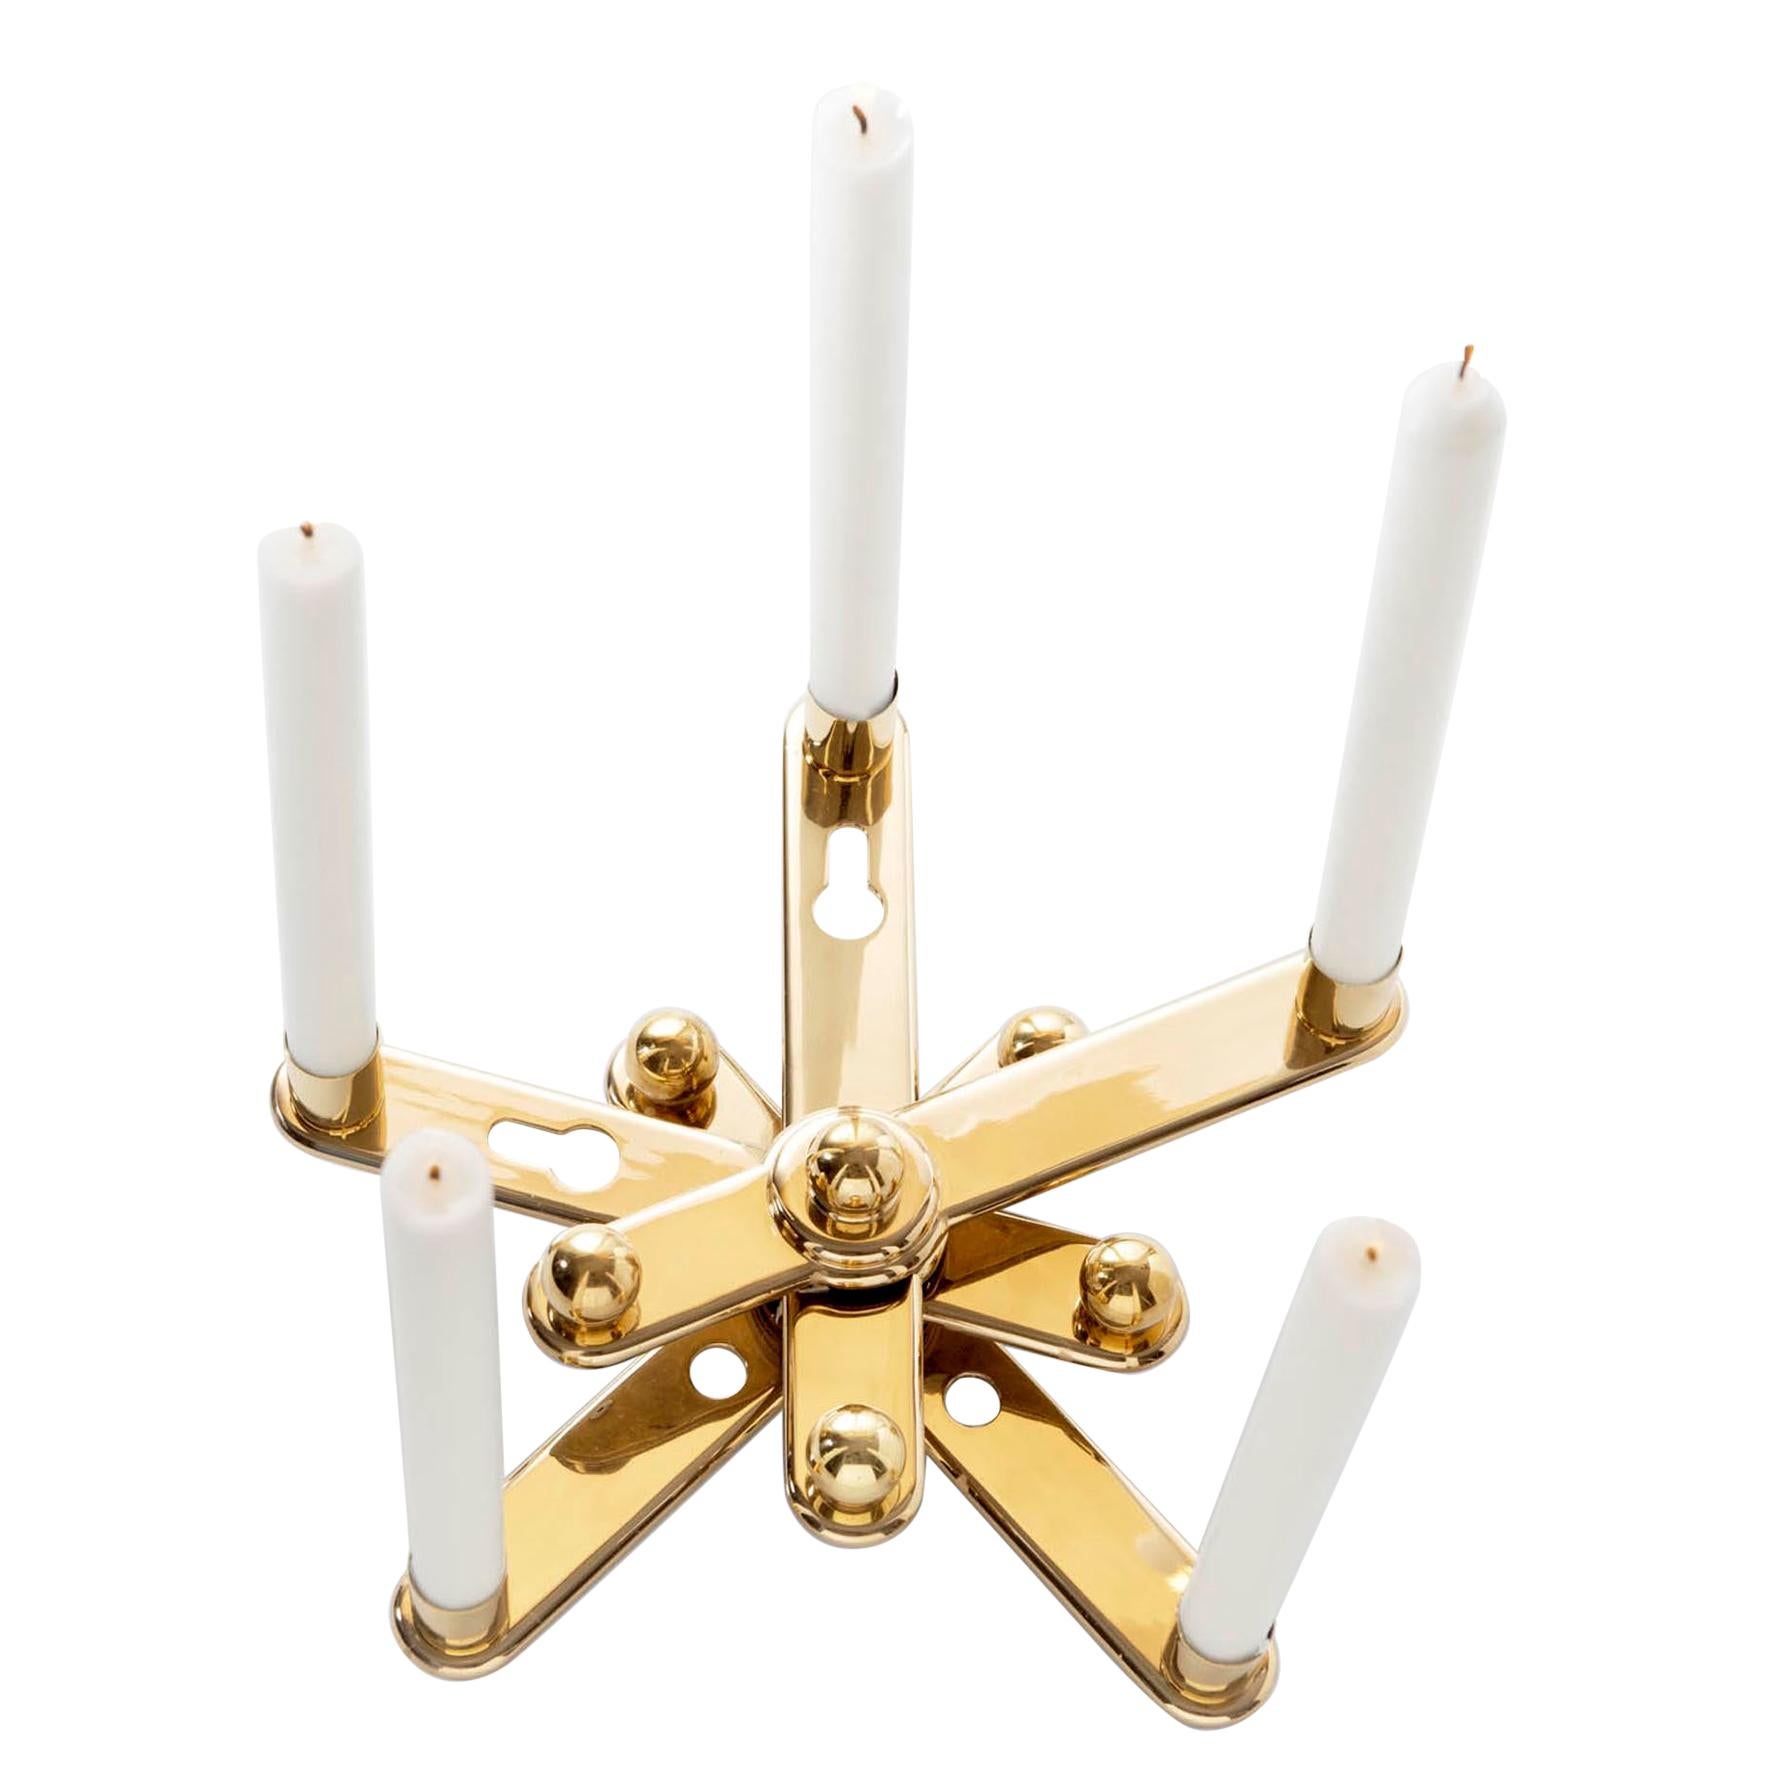 Candleholder in solid brass made out from recycled door handles. Edition of 75 For Sale